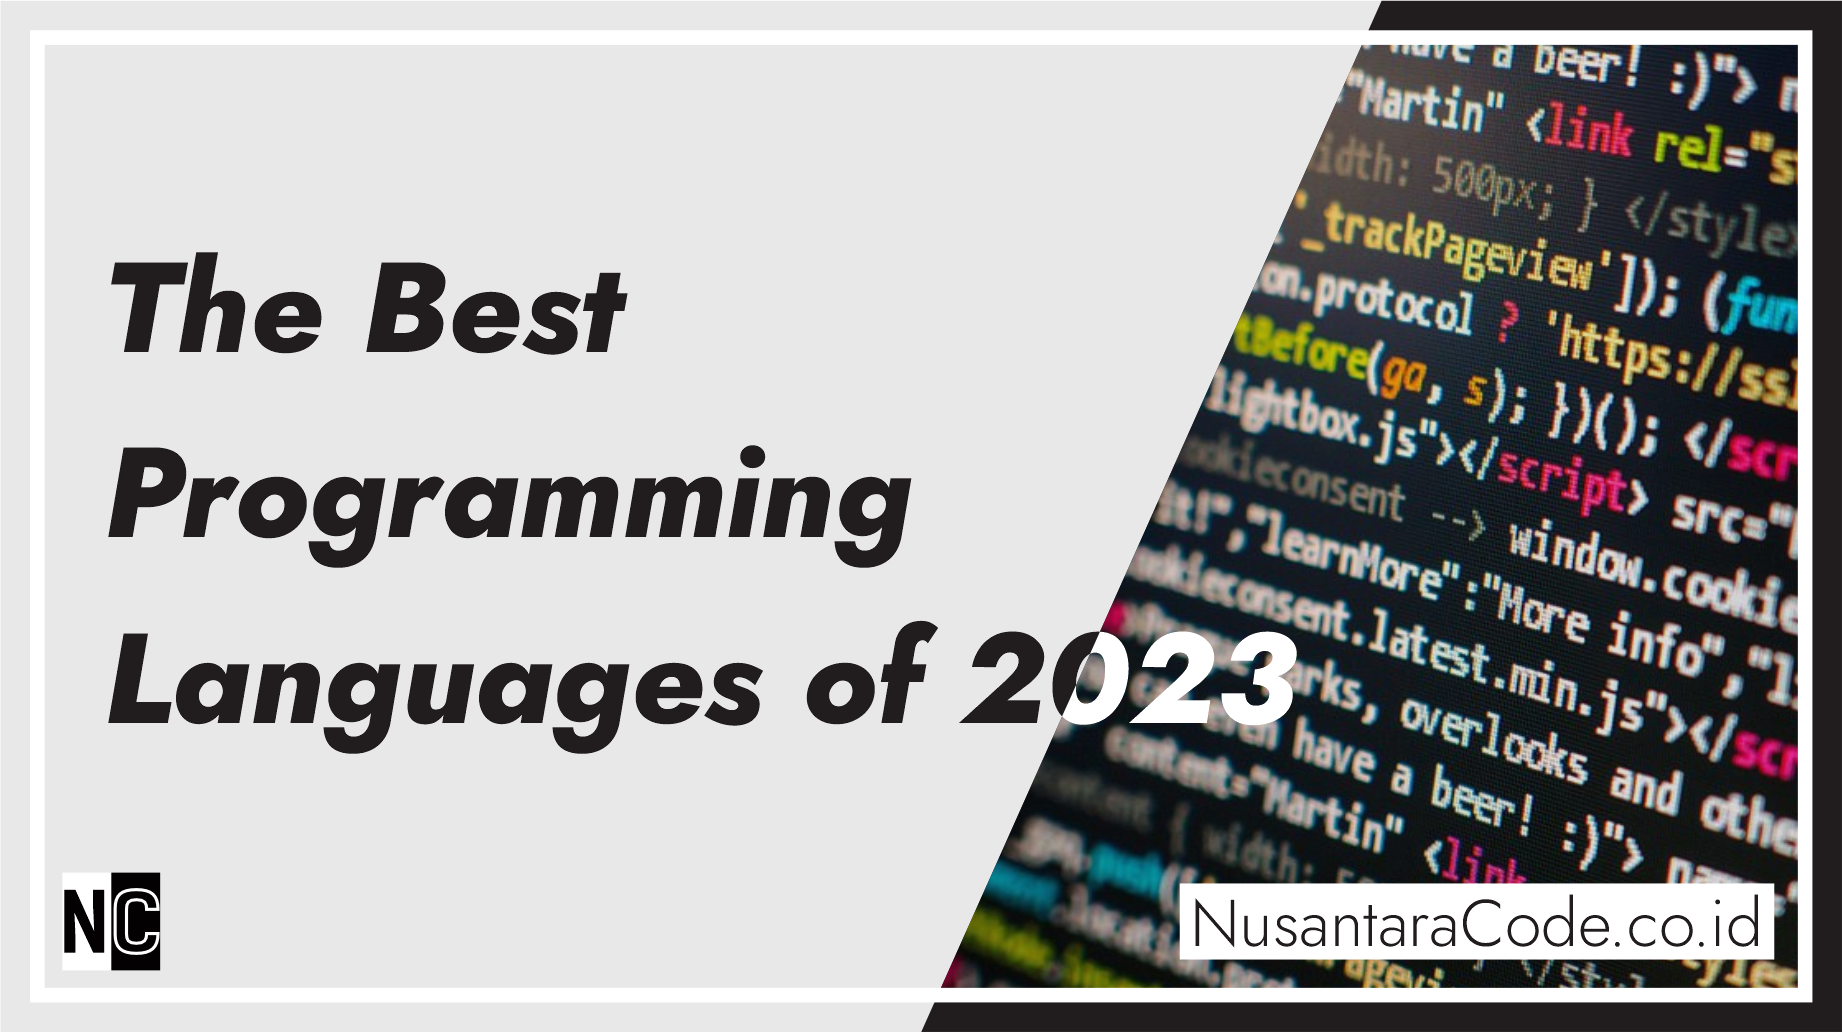 The Best Programming Languages of 2023